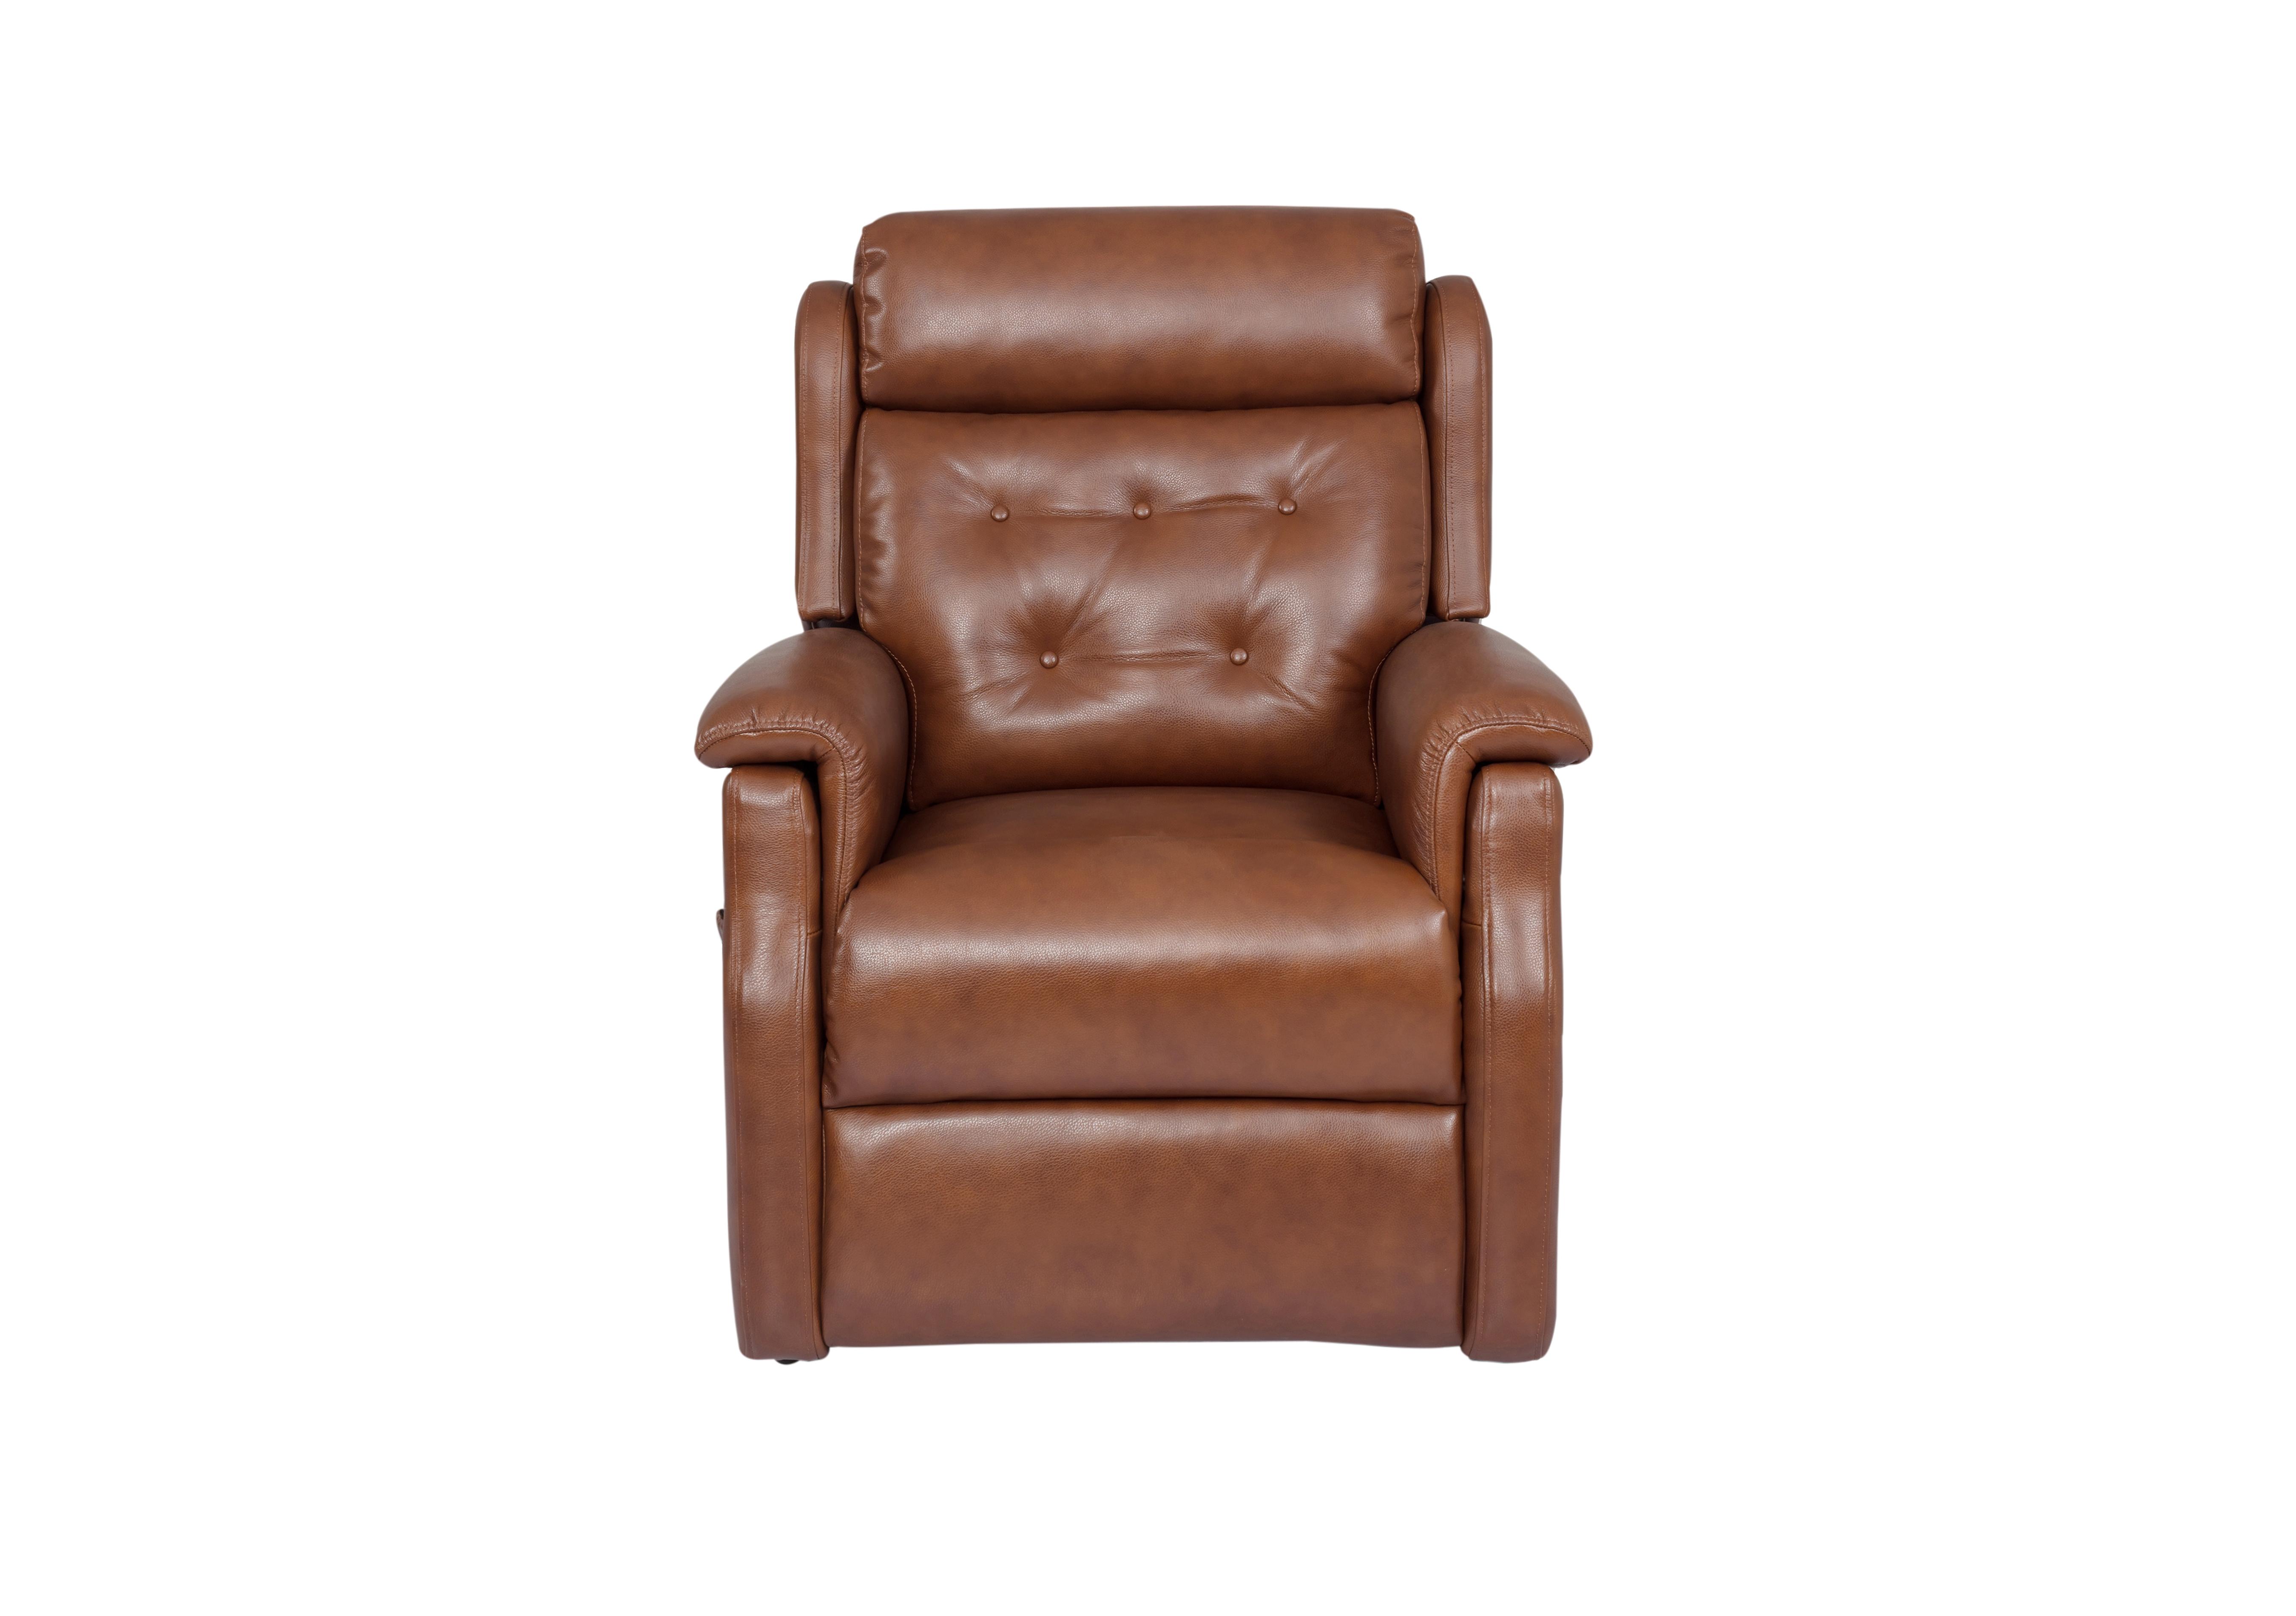 My Chair Scott Leather Lift and Rise Chair in Cat-60/07 Montana Butterscotch on Furniture Village